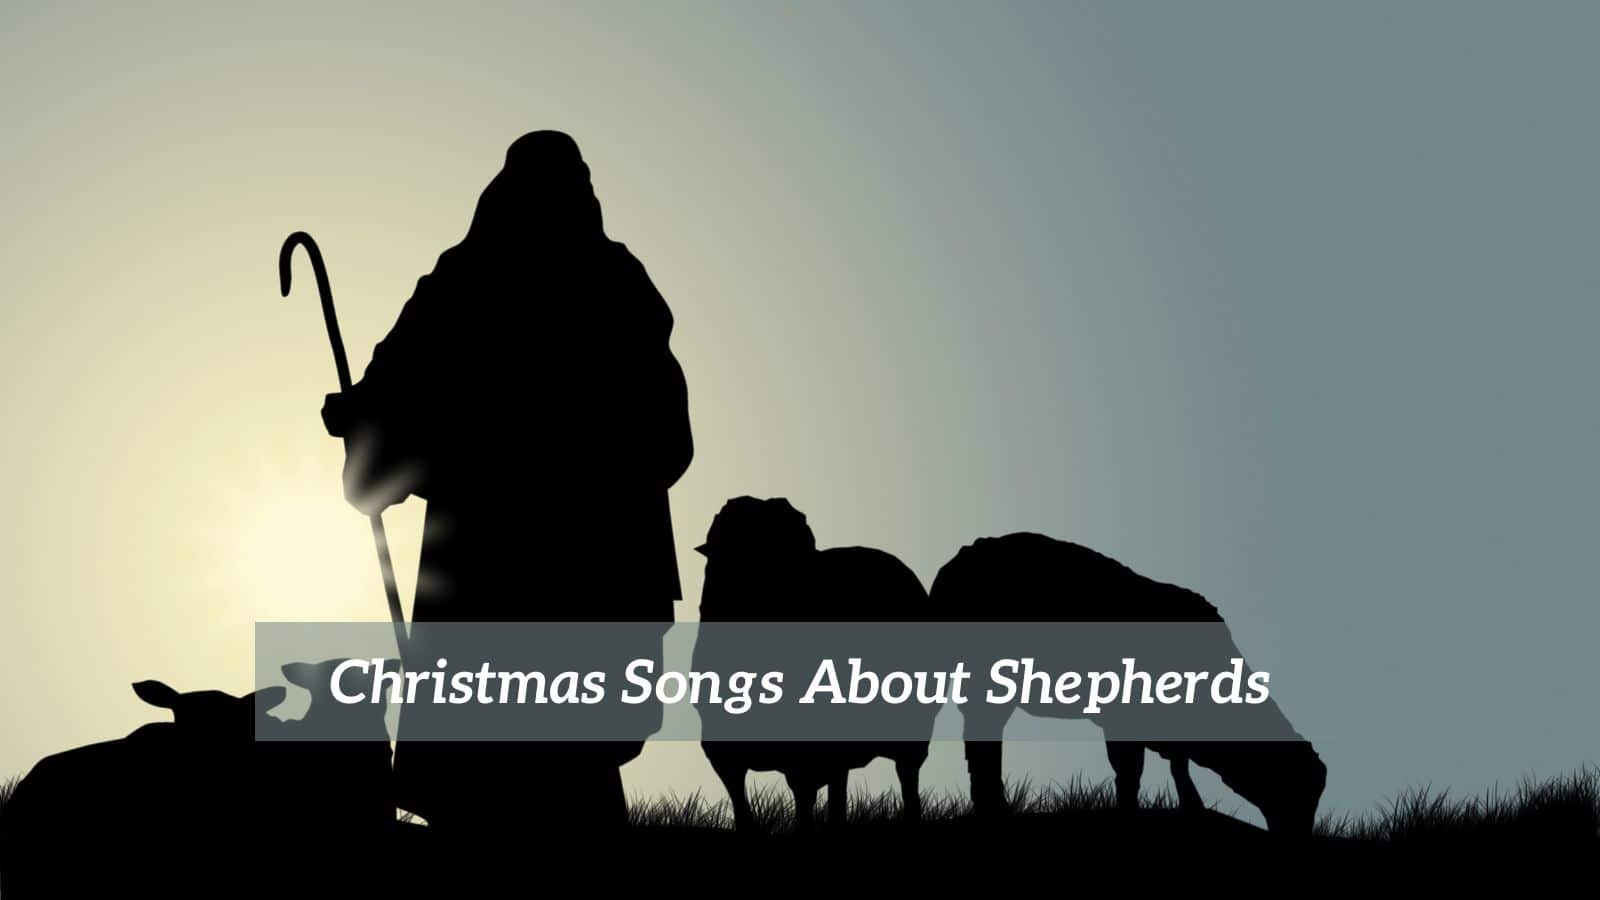 Christmas Songs About Shepherds